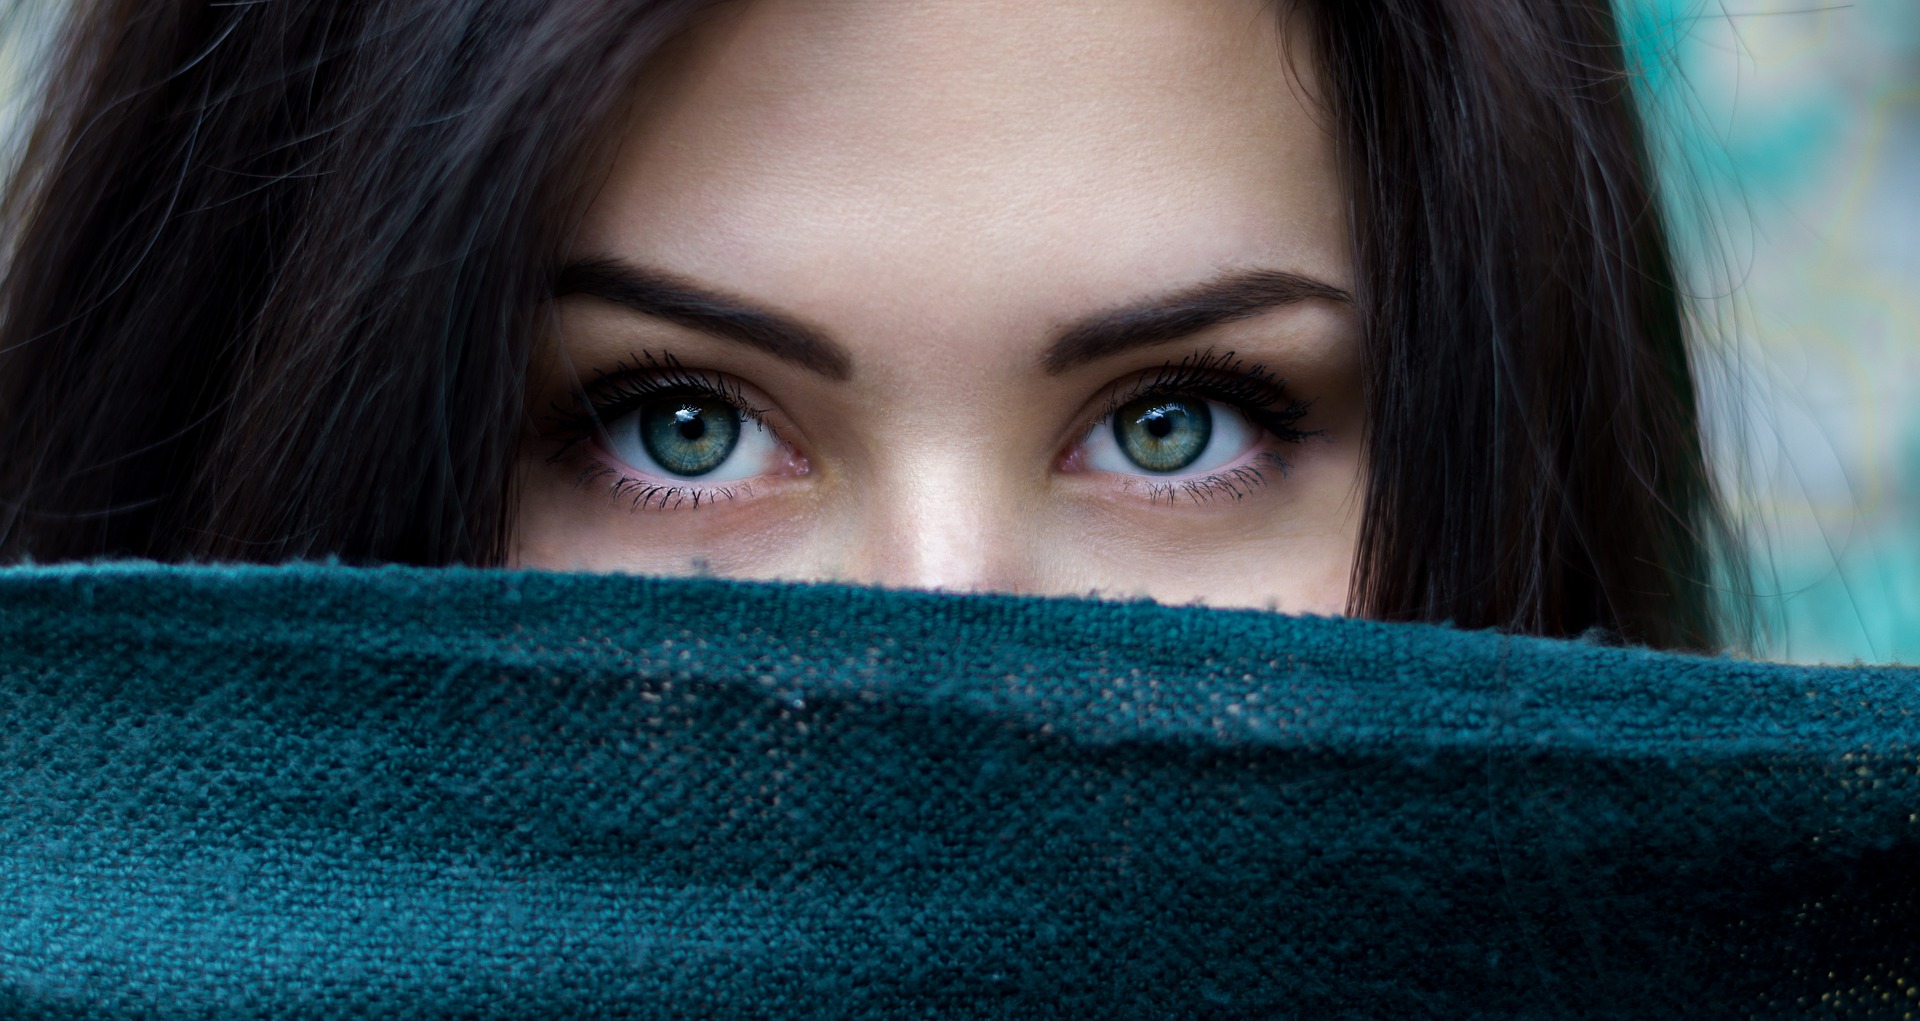 Beautiful and mysterious eyes